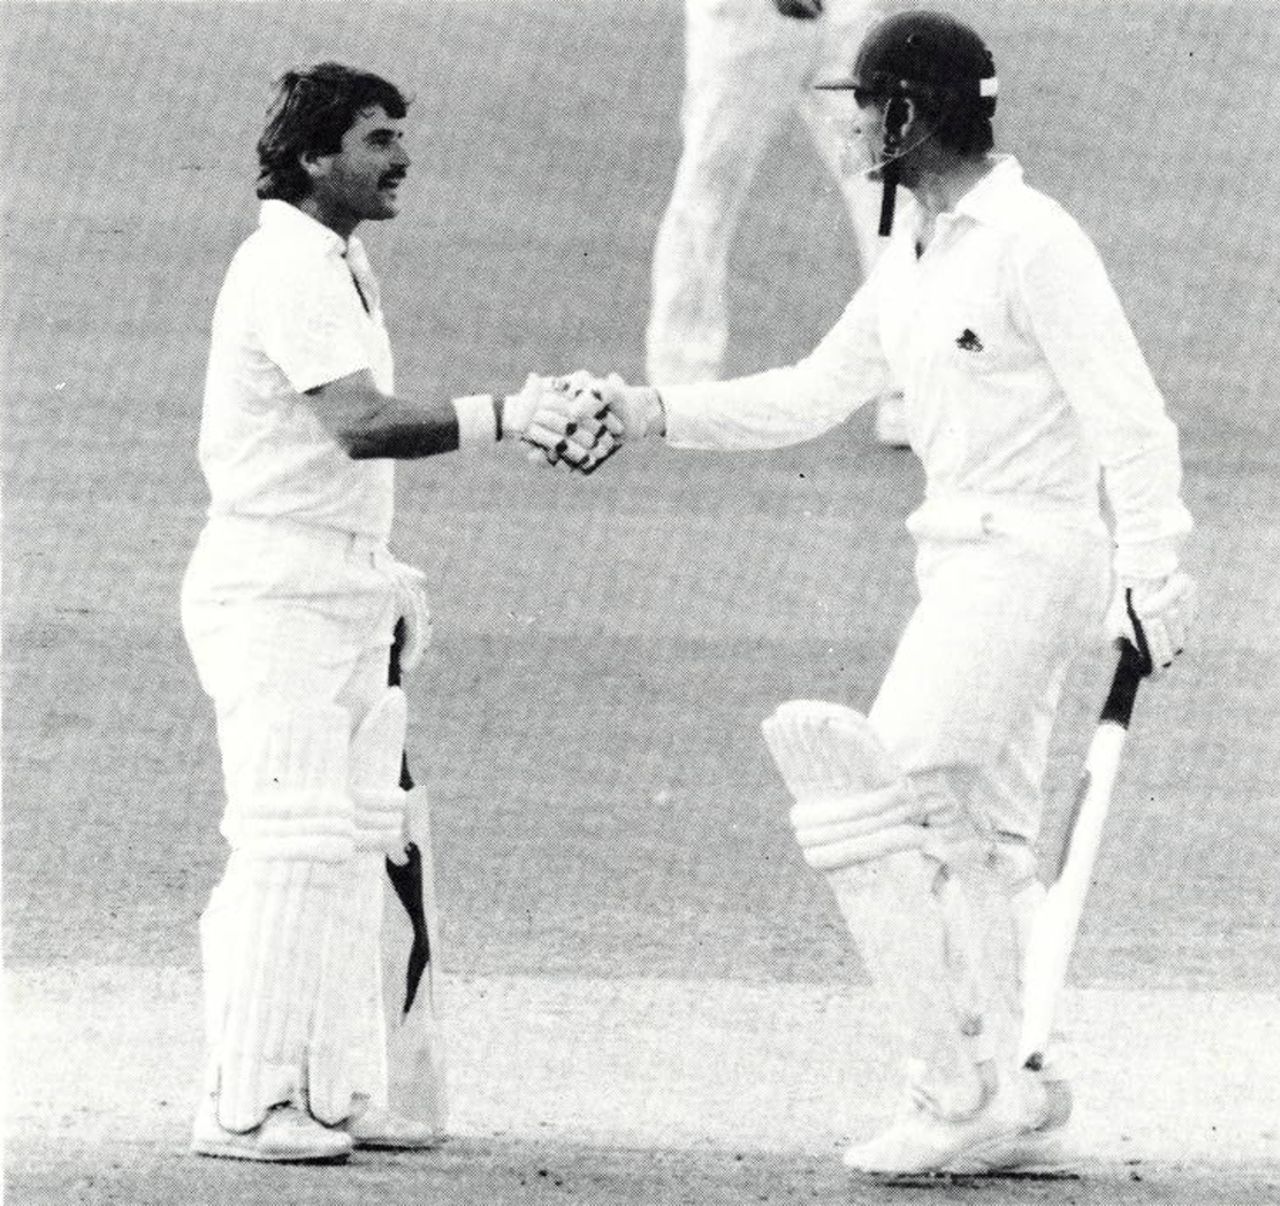 An unusual celebration ... Pat Pocock is congratulated by Allan Lamb on his first international run of the summer in his fifth innings, England v Sri Lanka, Lord's, August 27, 1984